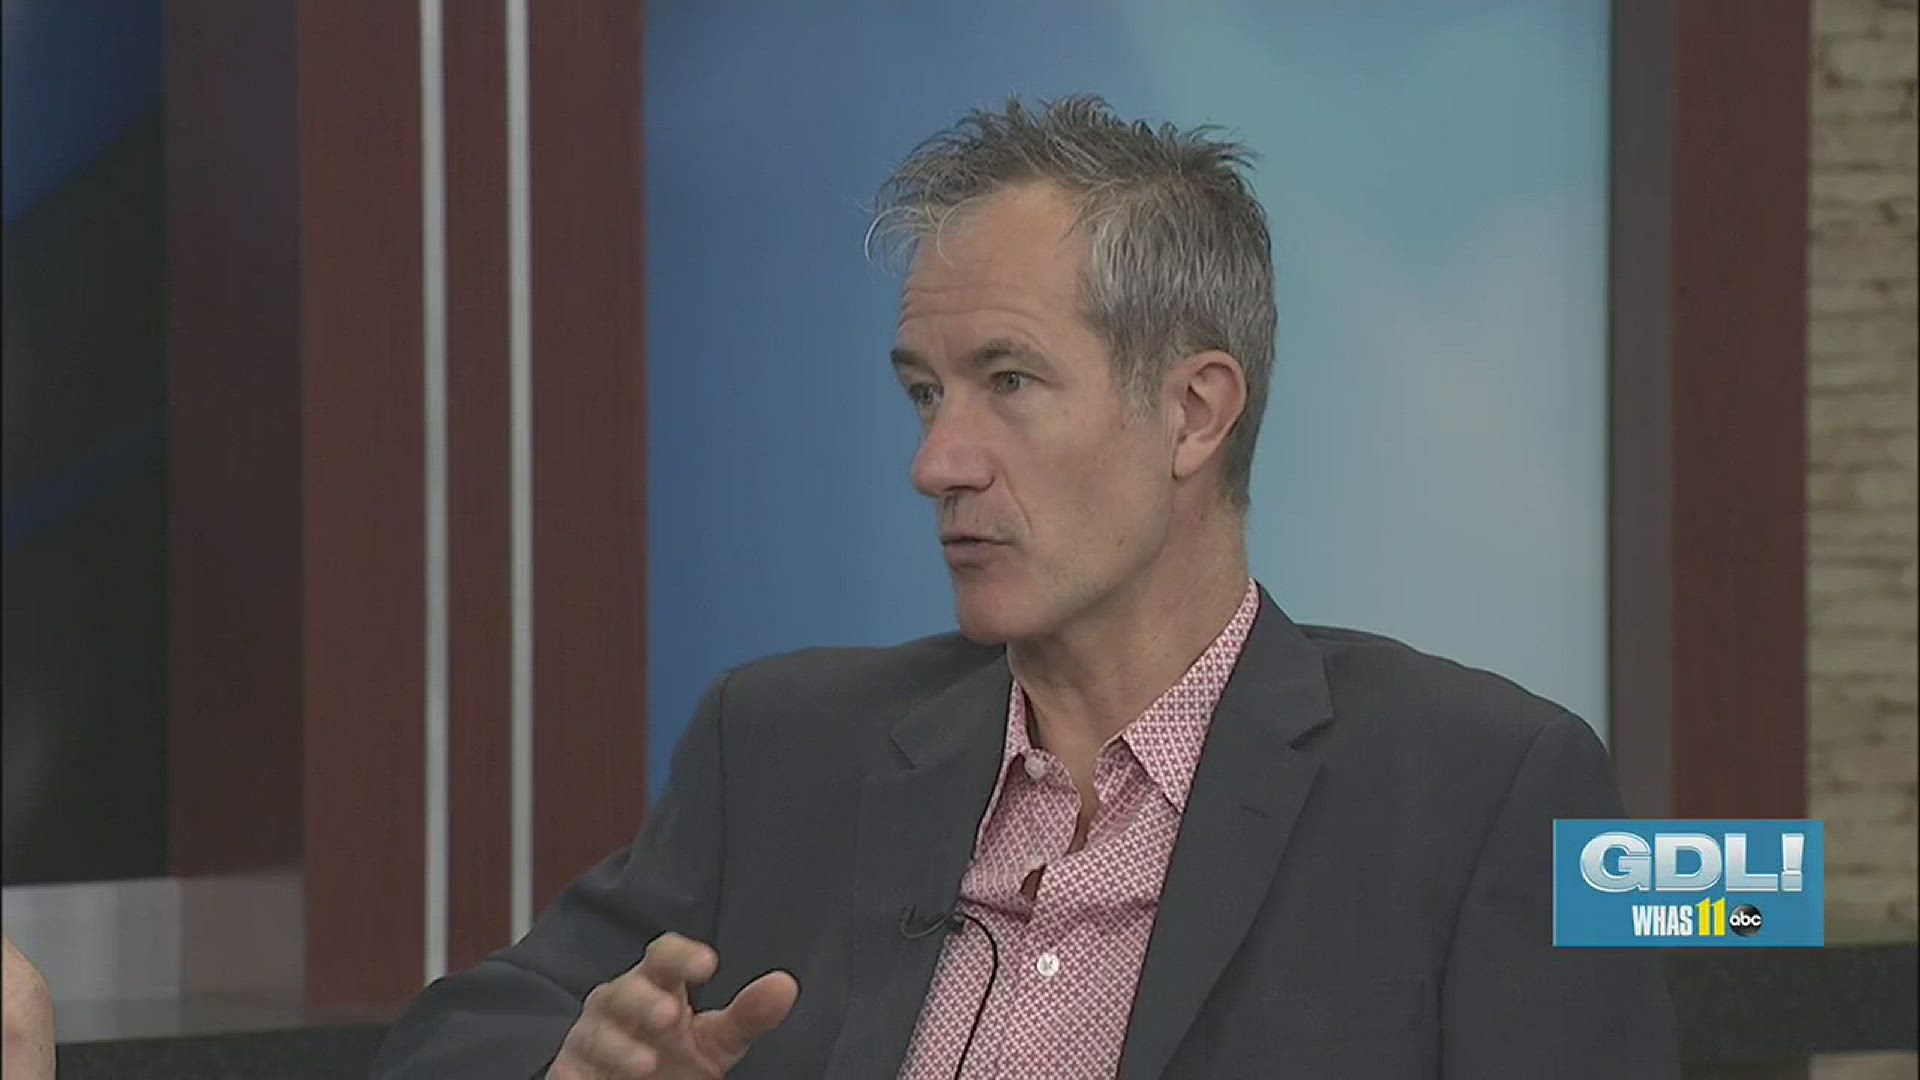 Author Geoff Dyer talks about his new book White Sands